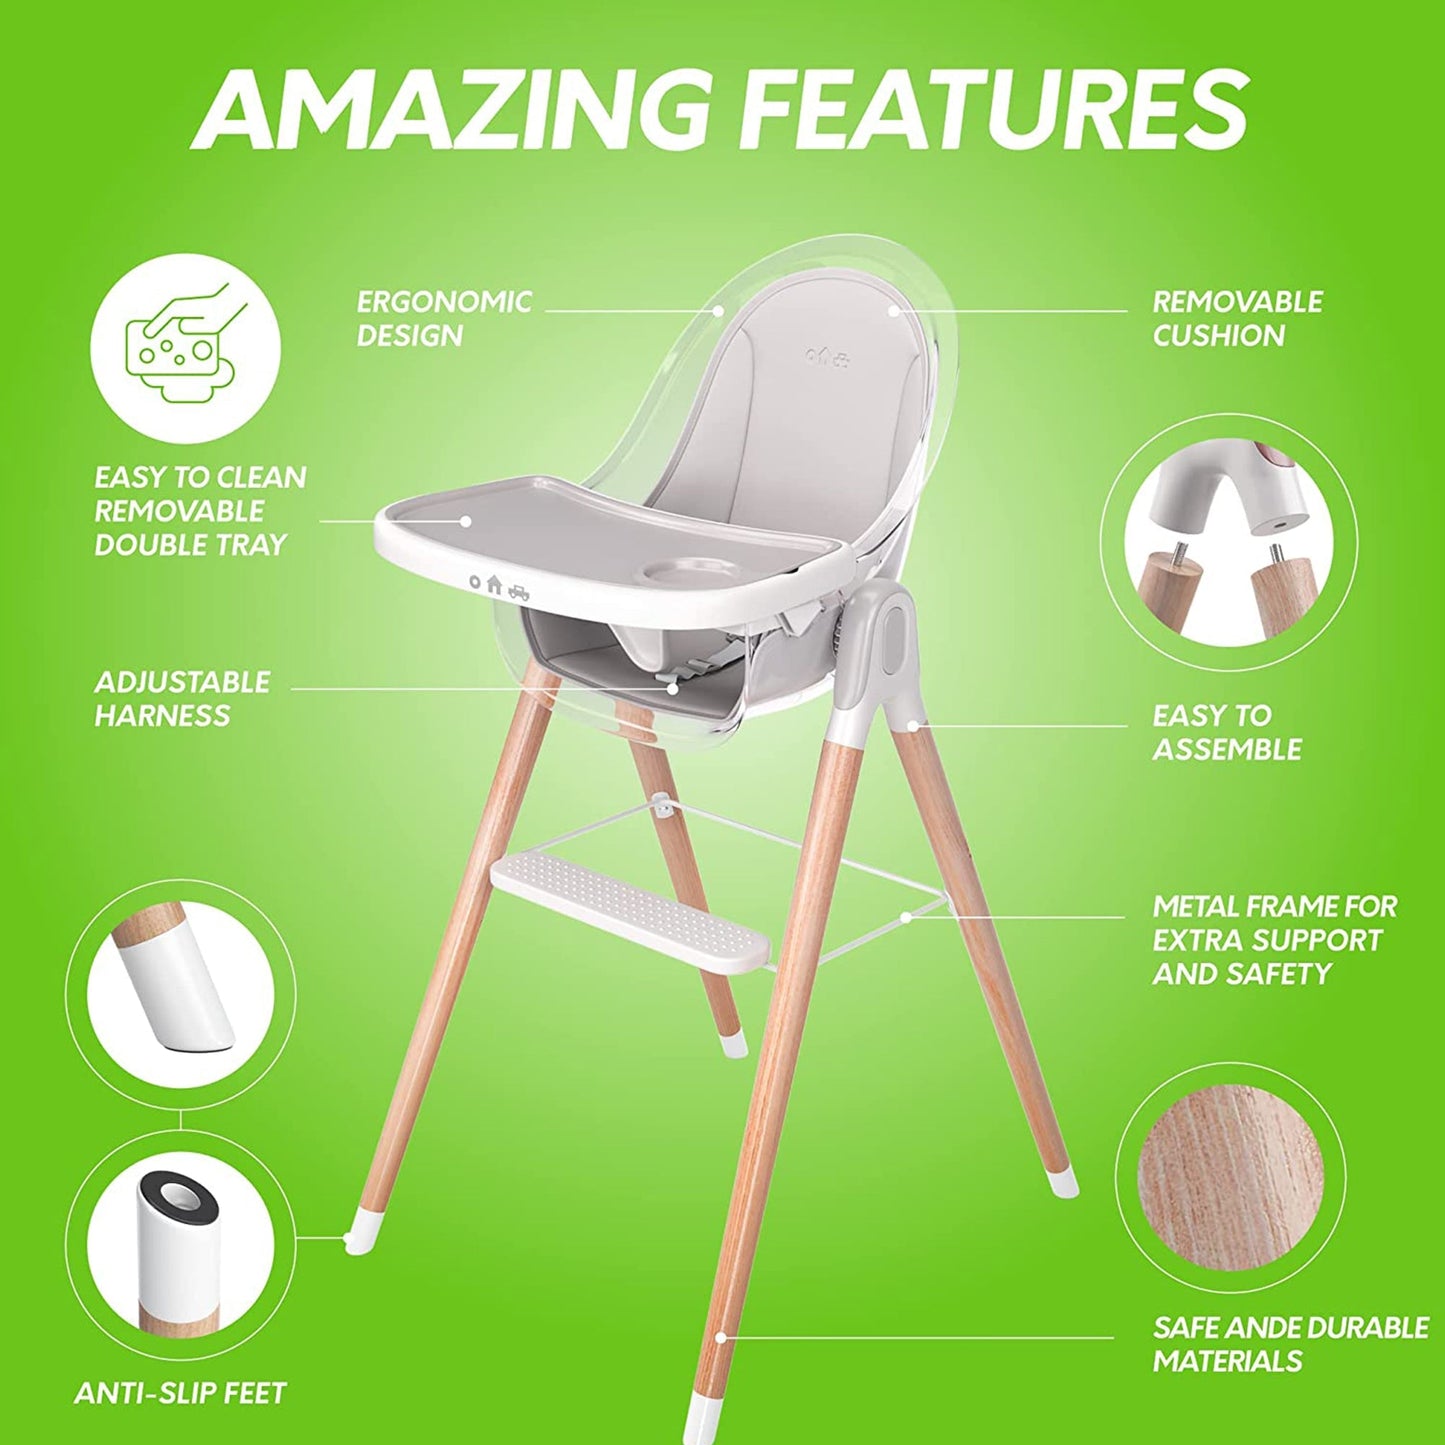 Children of Design 6 in 1 Deluxe Wooden High Chair for Babies & Toddlers, Modern Safe & Compact Baby Highchair